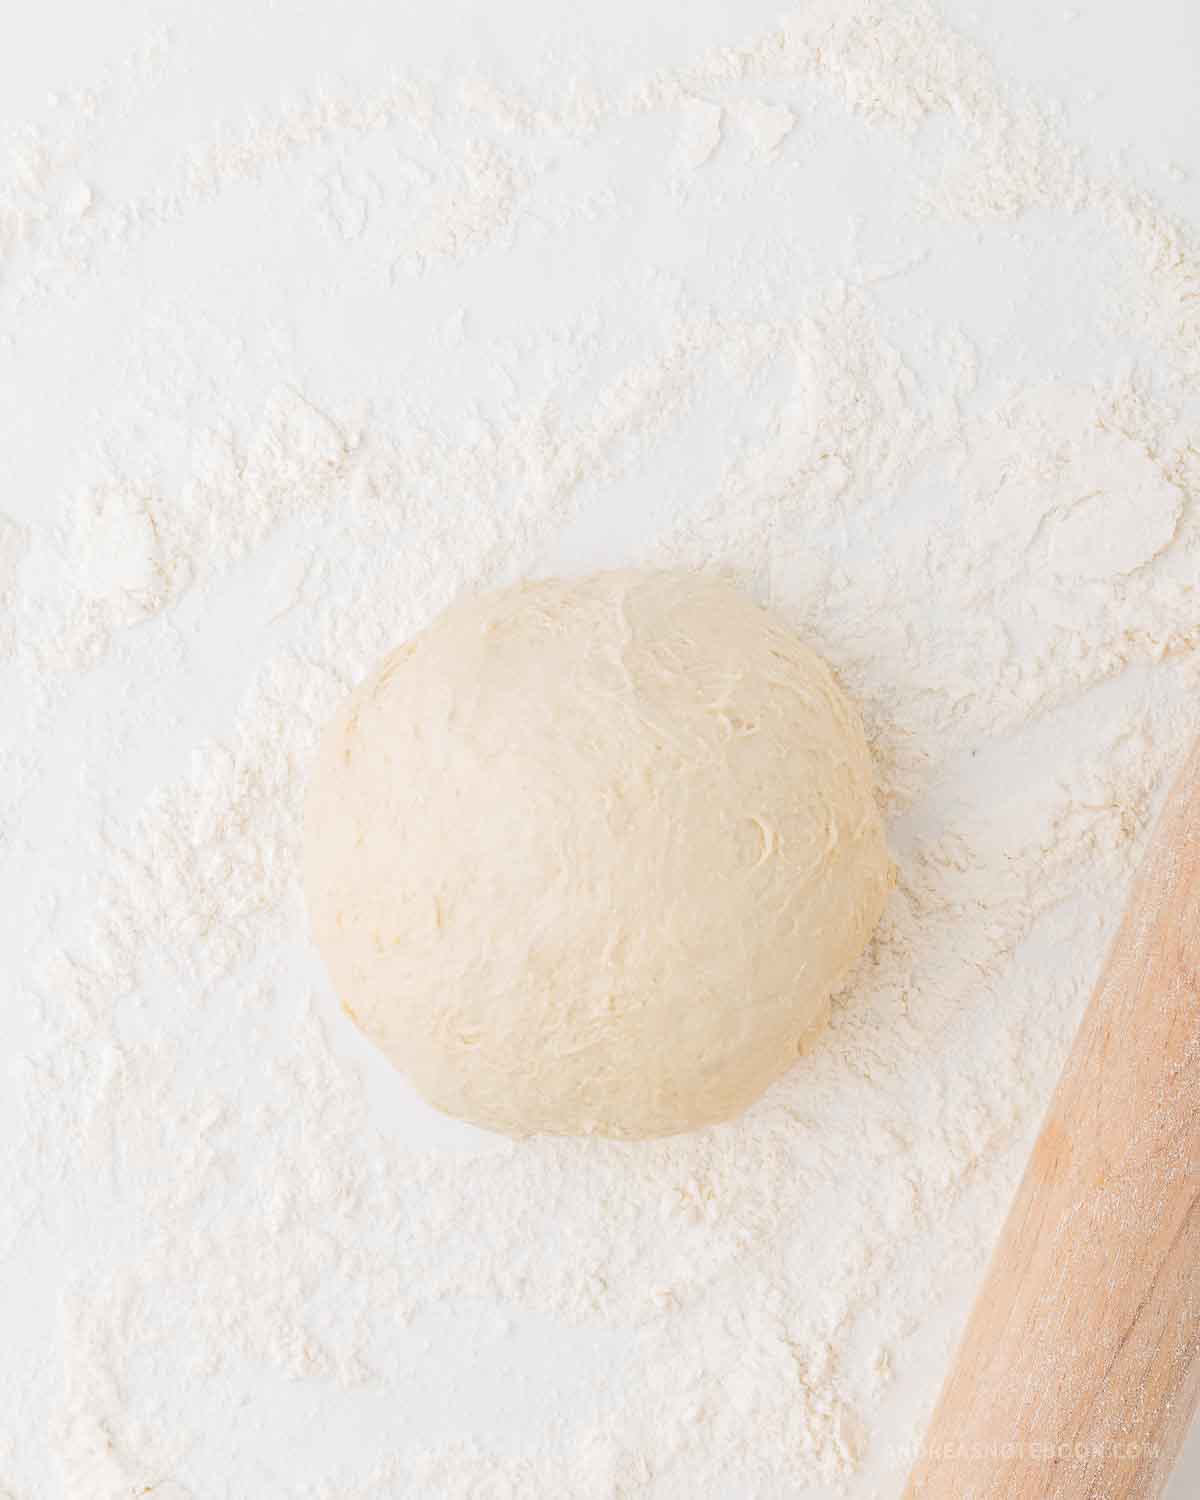 Ball of pizza dough on a lightly floured surface.